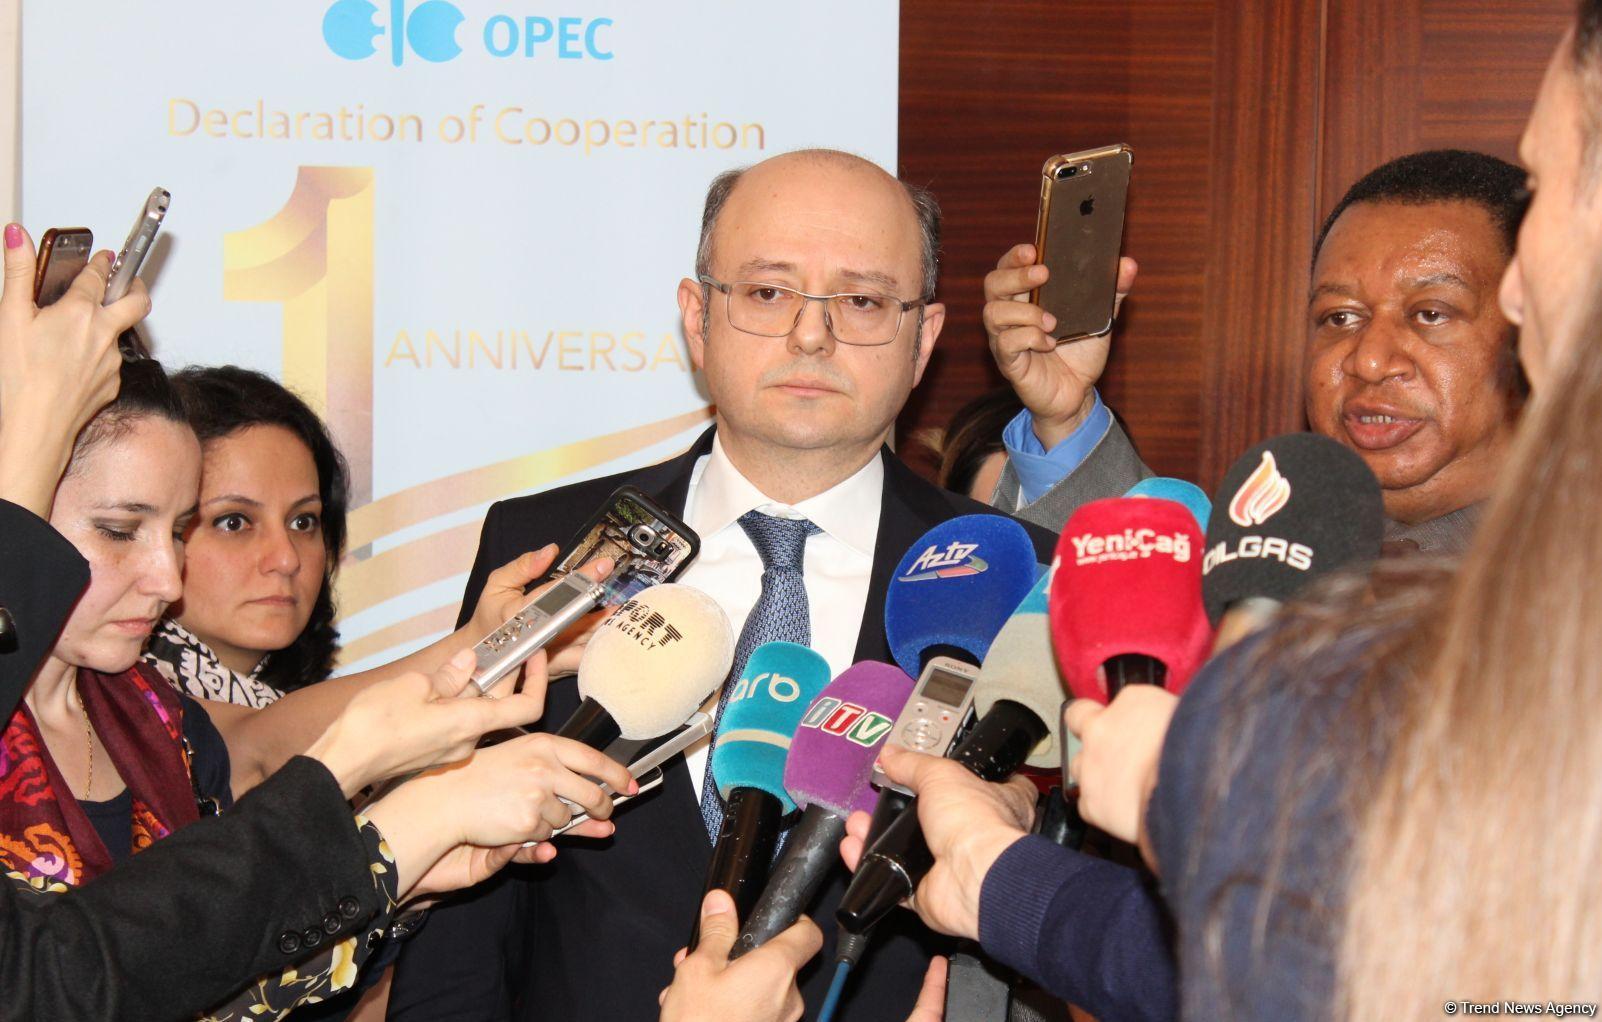 OPEC-Azerbaijan co-op helped stabilize oil prices: minister